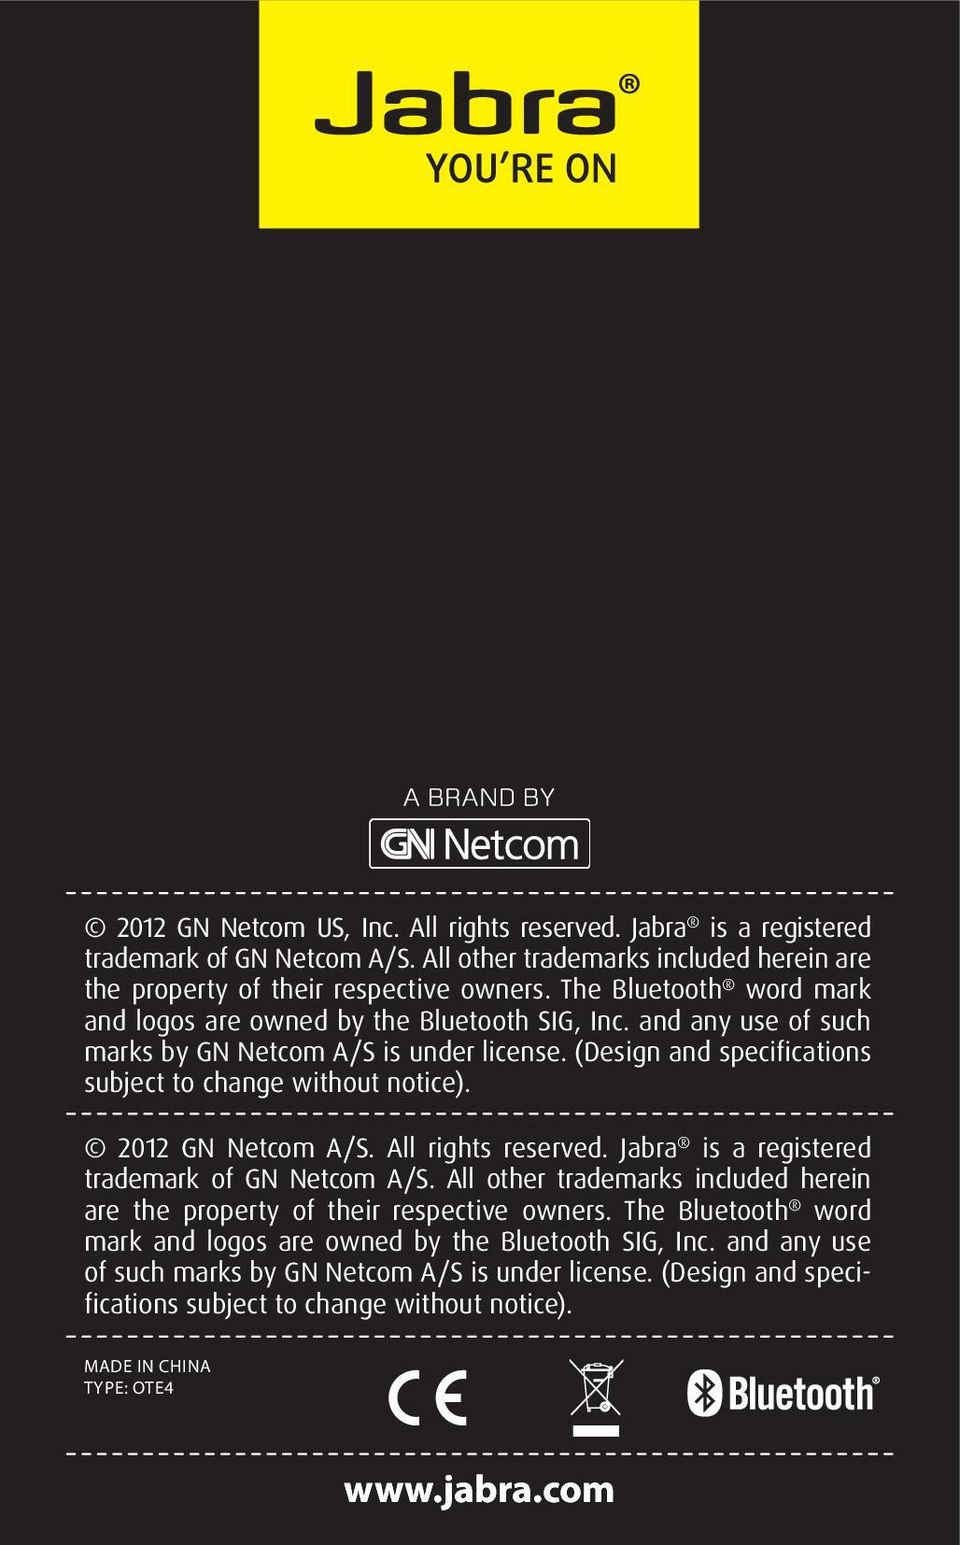 2012 GN Netcom A/S. All rights reserved. Jabra is a registered trademark of GN Netcom A/S. All other trademarks included herein are the property of their respective owners.